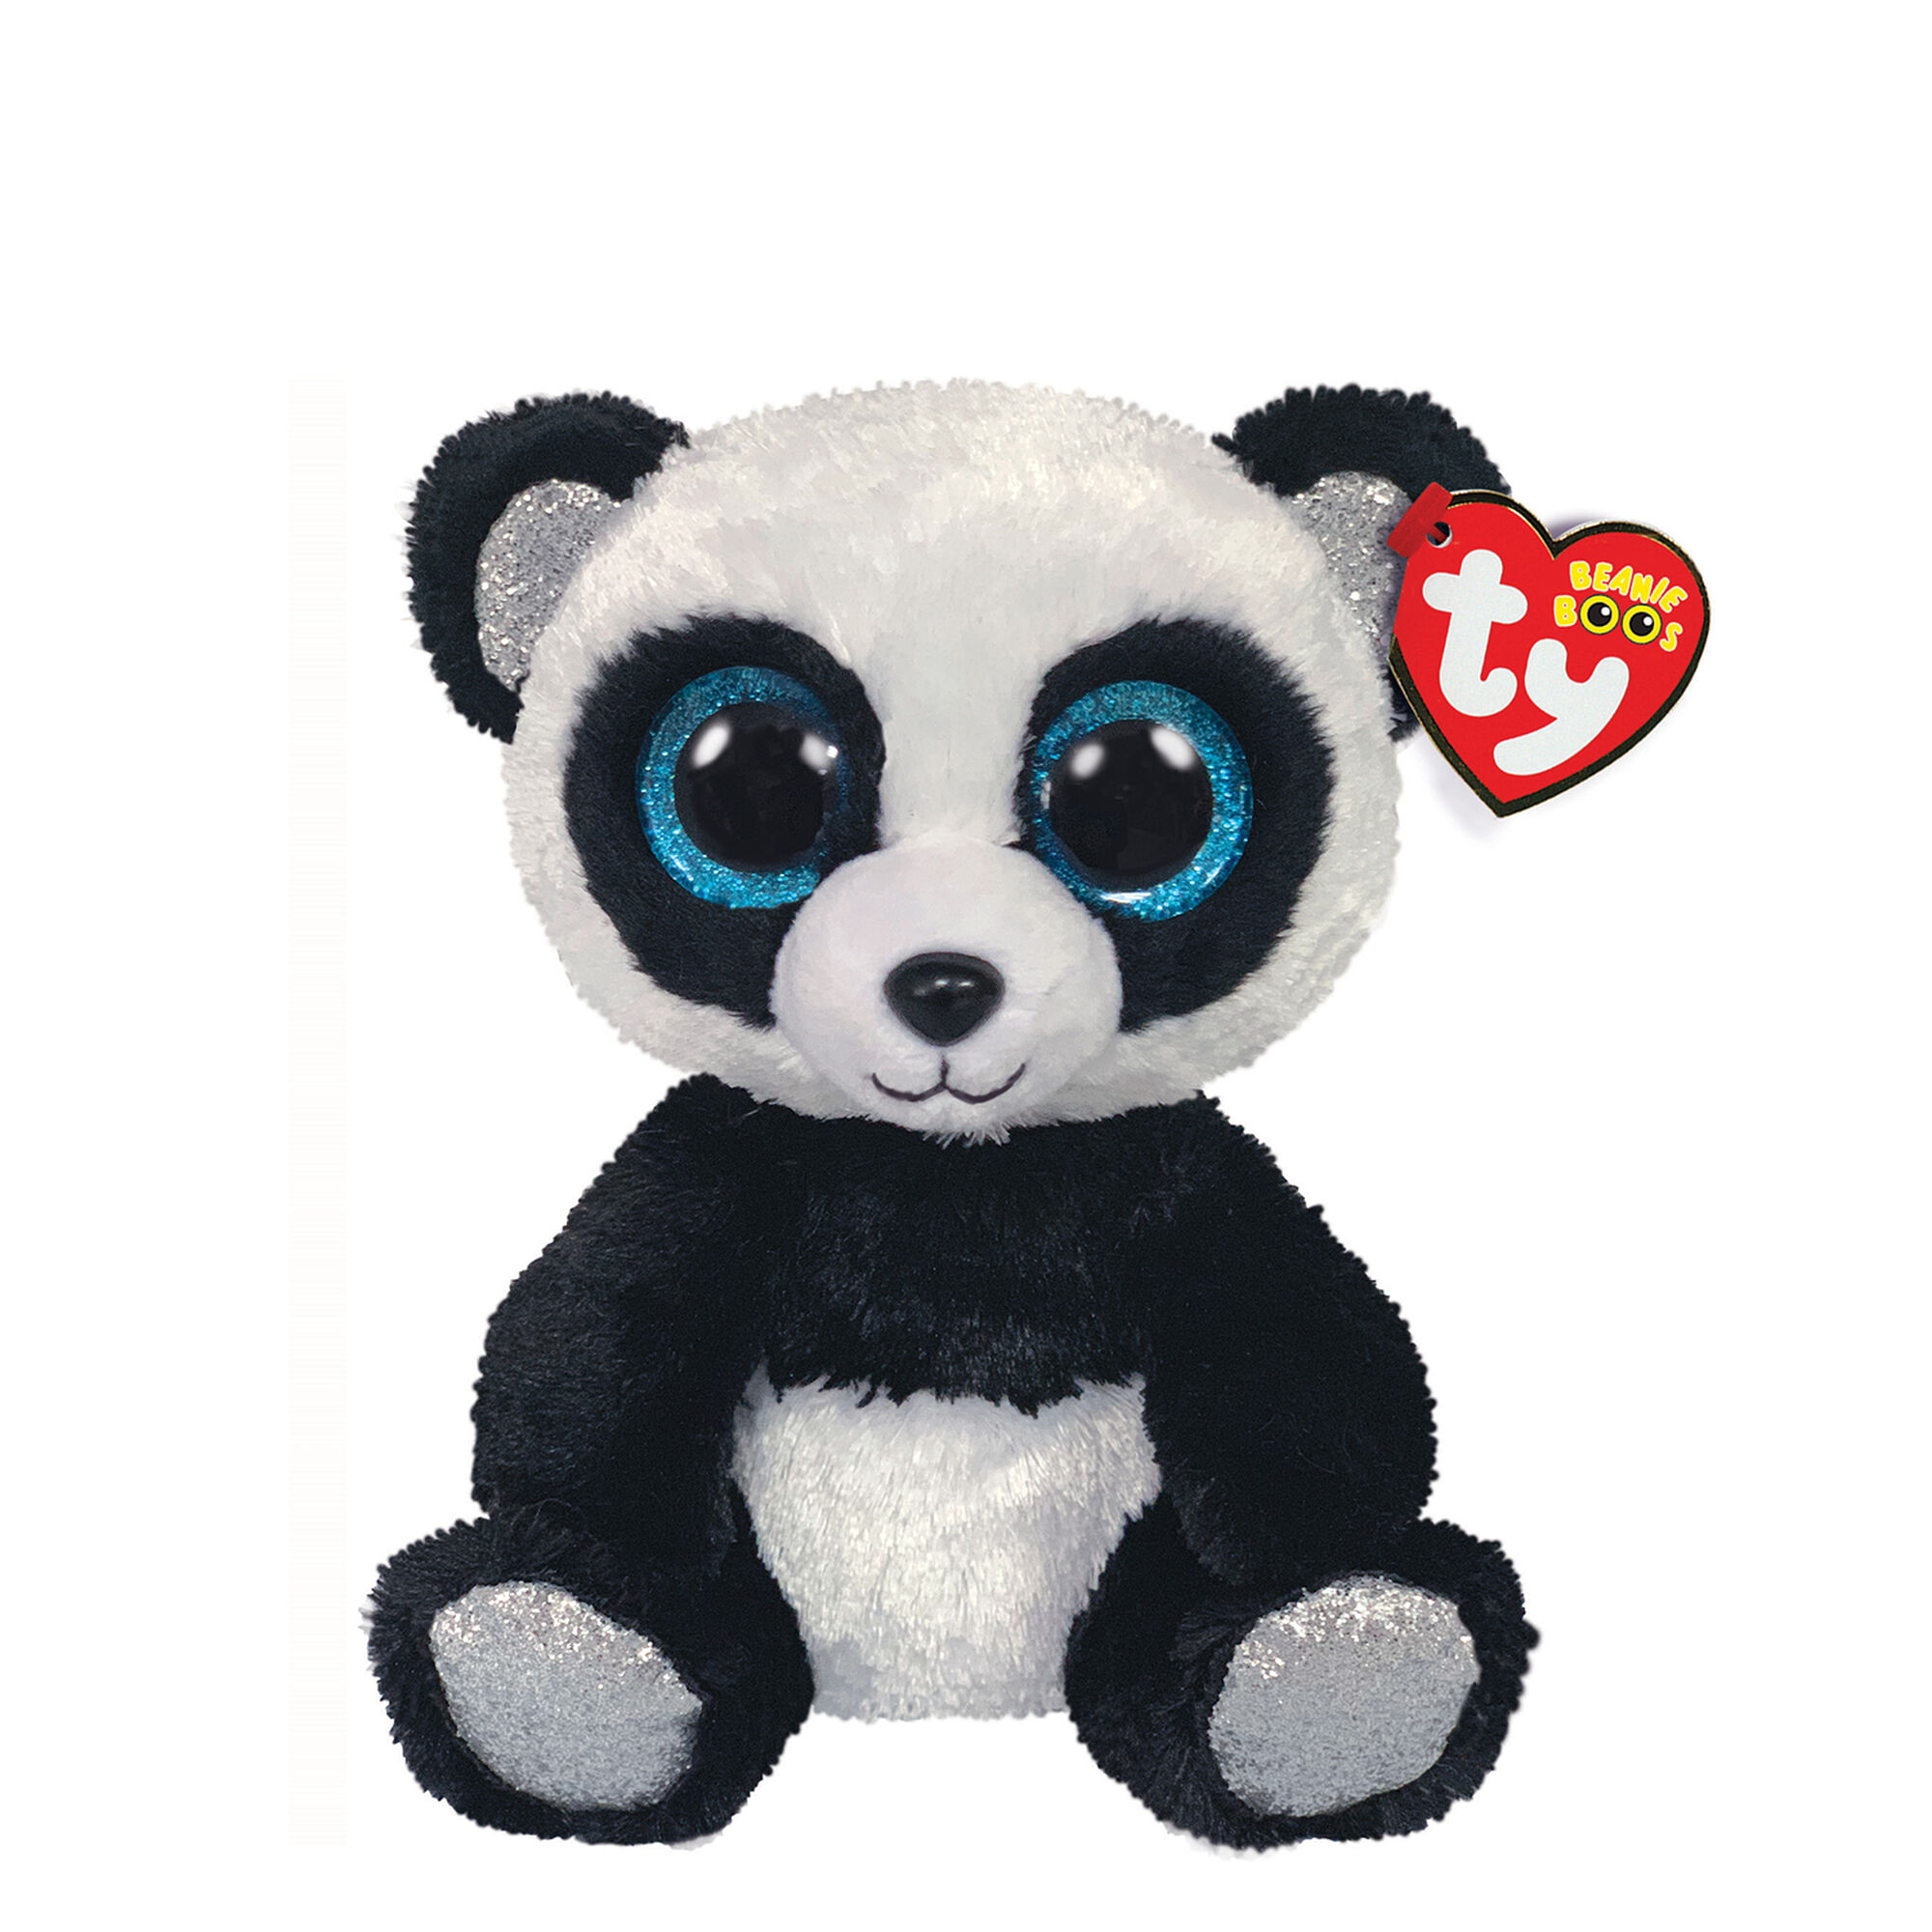 2020 Ty Flippables 6" Bamboo Panda Beanie Boo Color Changing Sequin Plush MWMTS for sale online